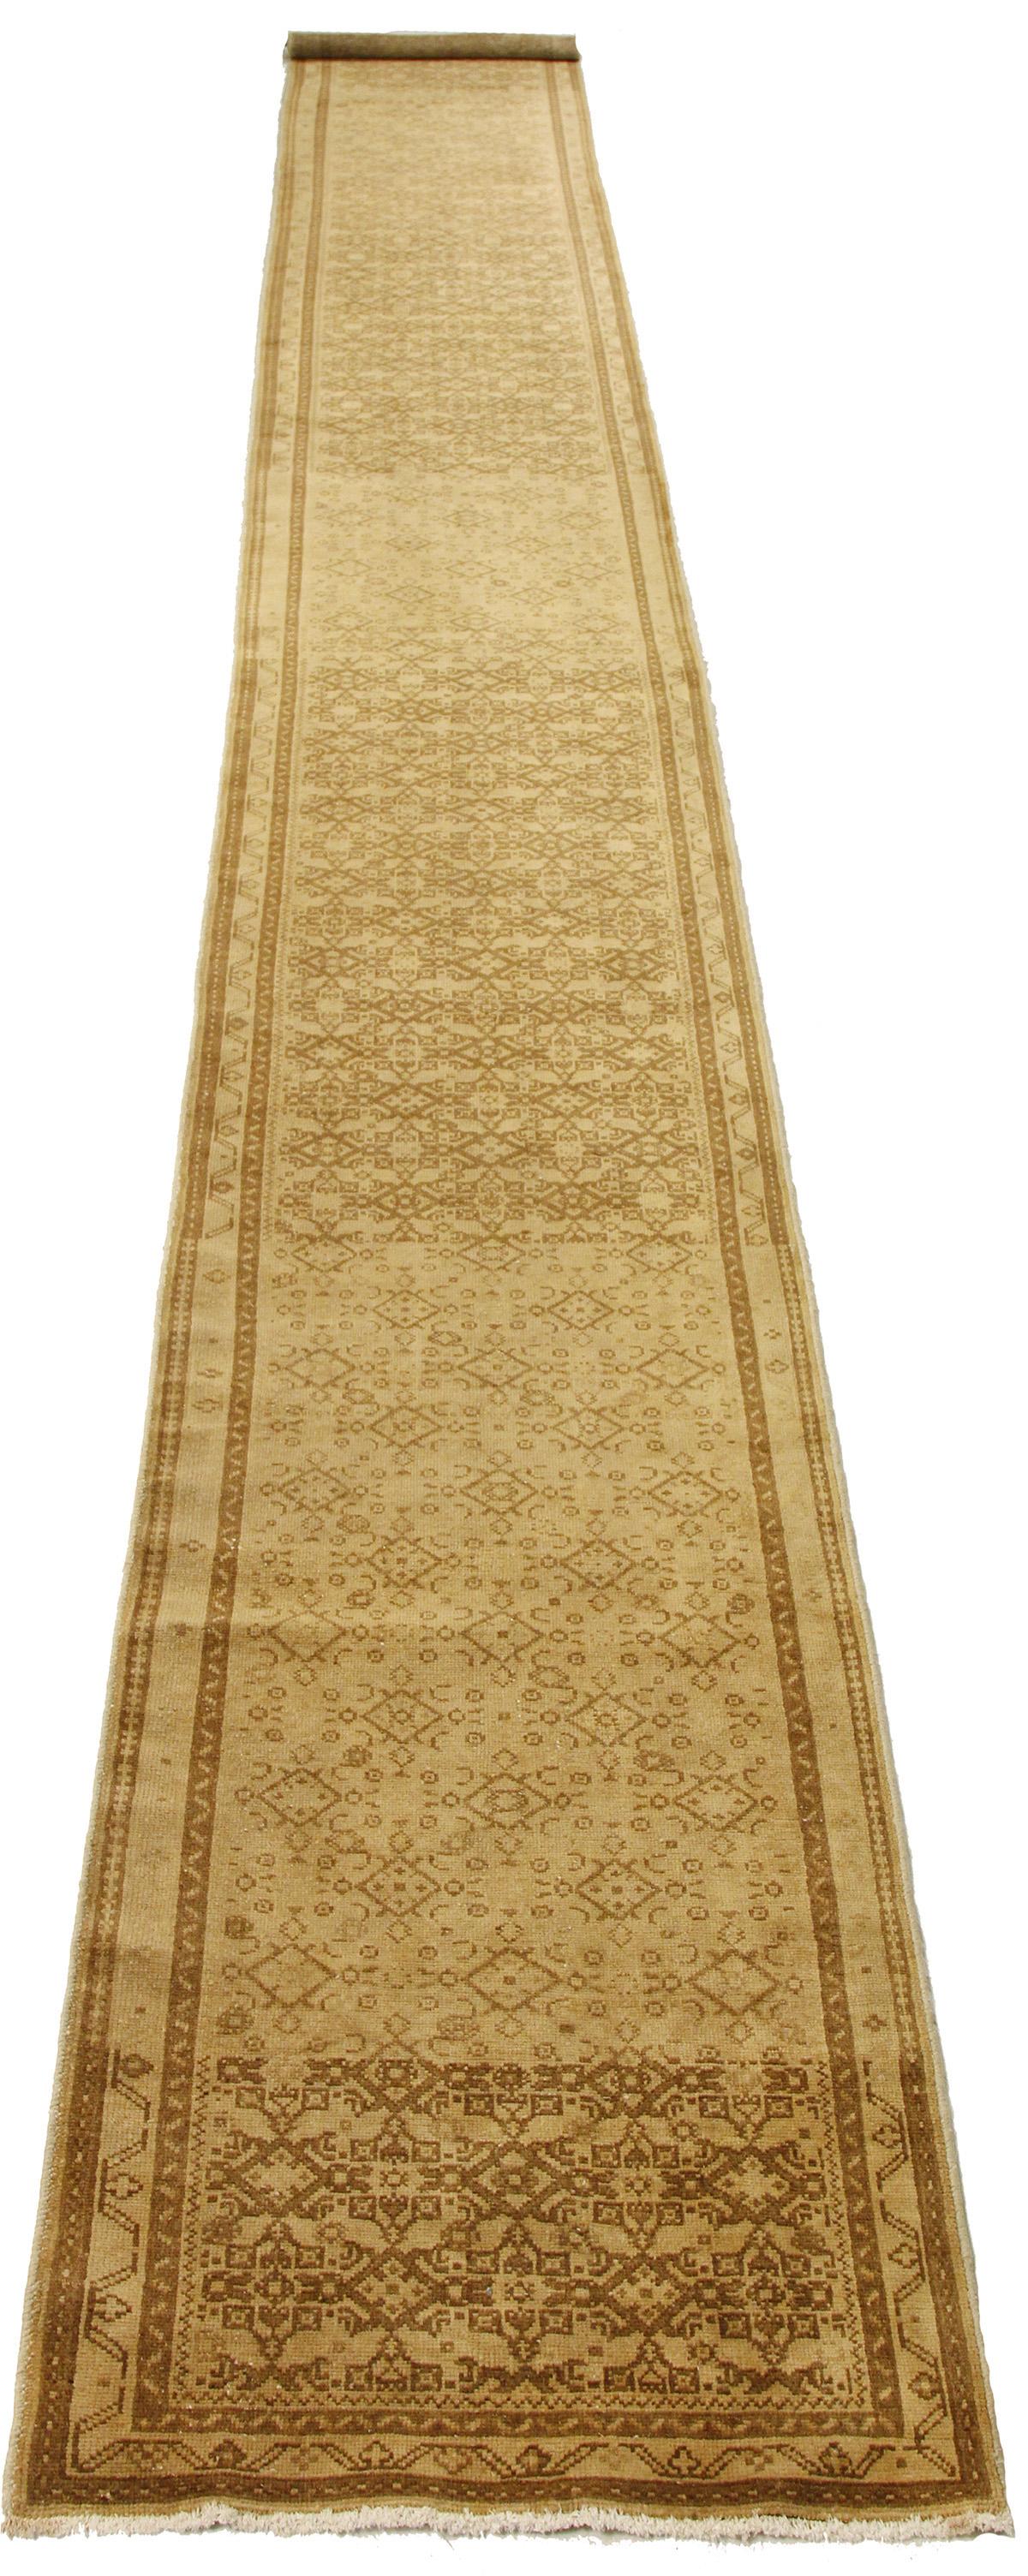 Antique Persian rug handwoven from the finest sheep’s wool and colored with all-natural vegetable dyes that are safe for humans and pets. It’s a traditional Malayer design featuring brown and beige geometric details all-over its field. It’s a lovely